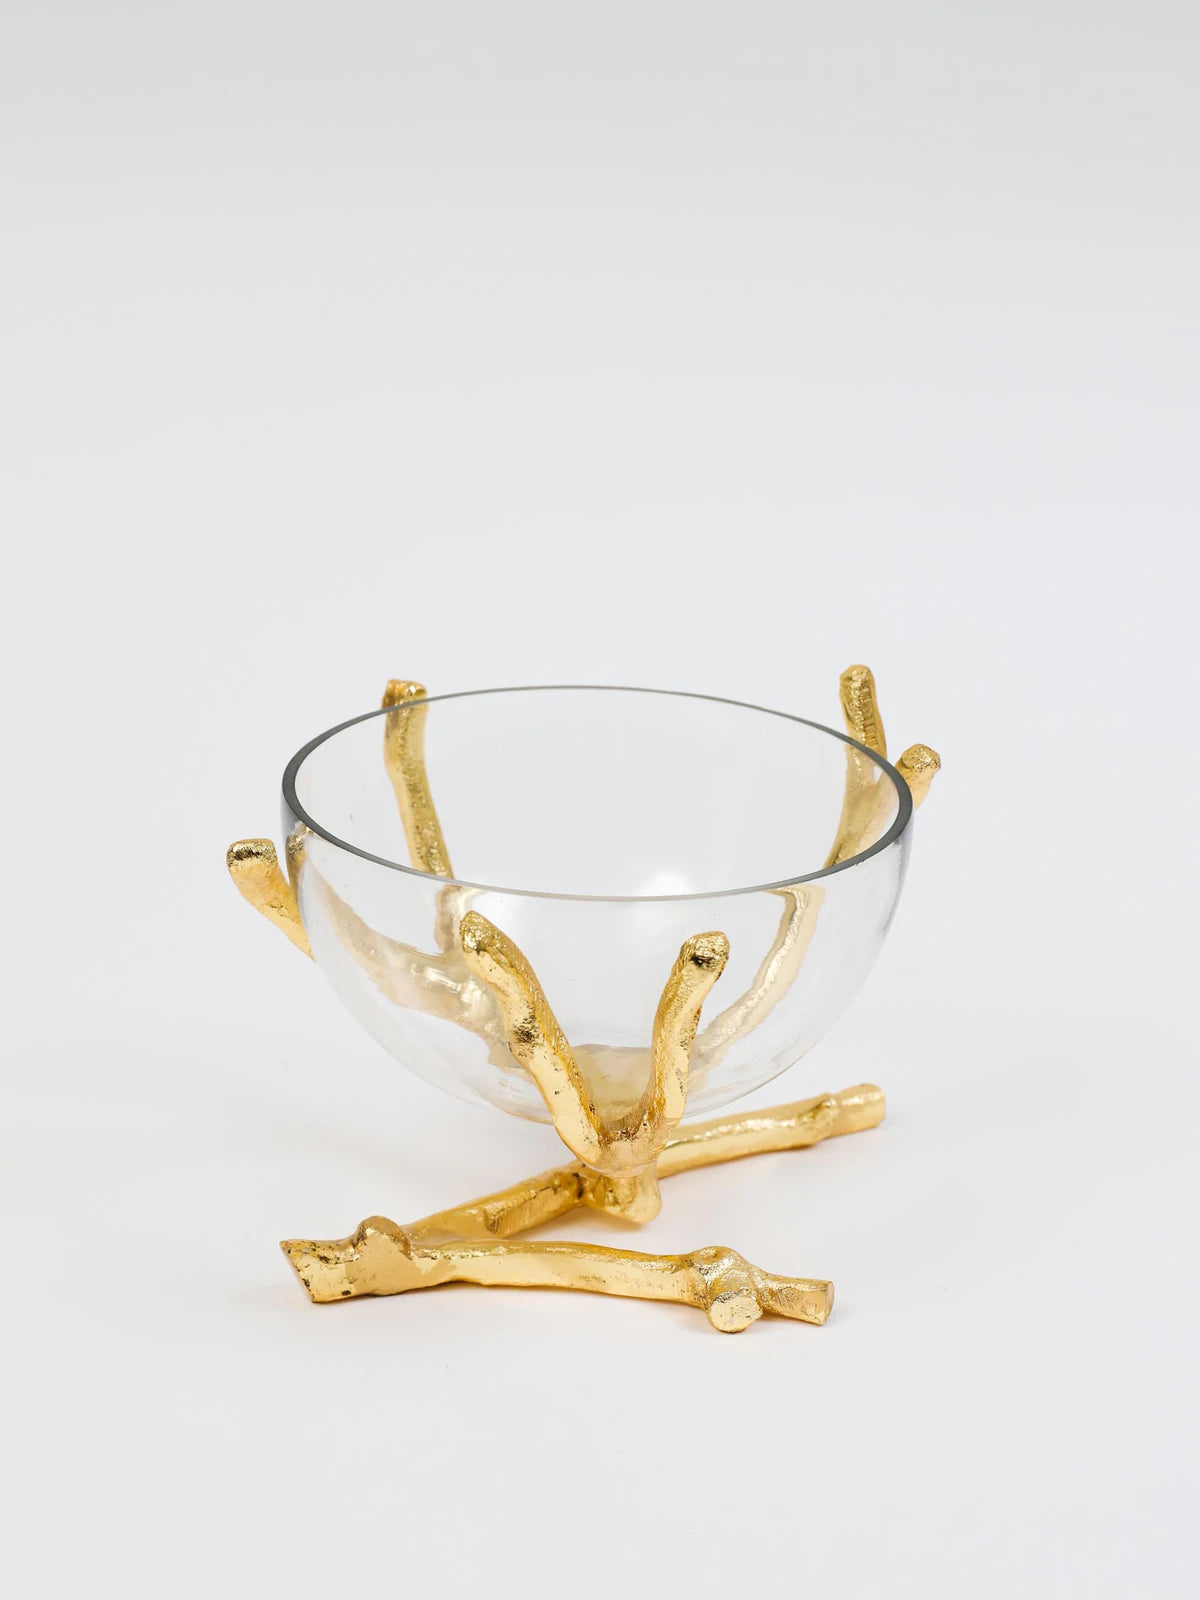 Gold Twig Base with Removable Glass Bowl, Small Size.